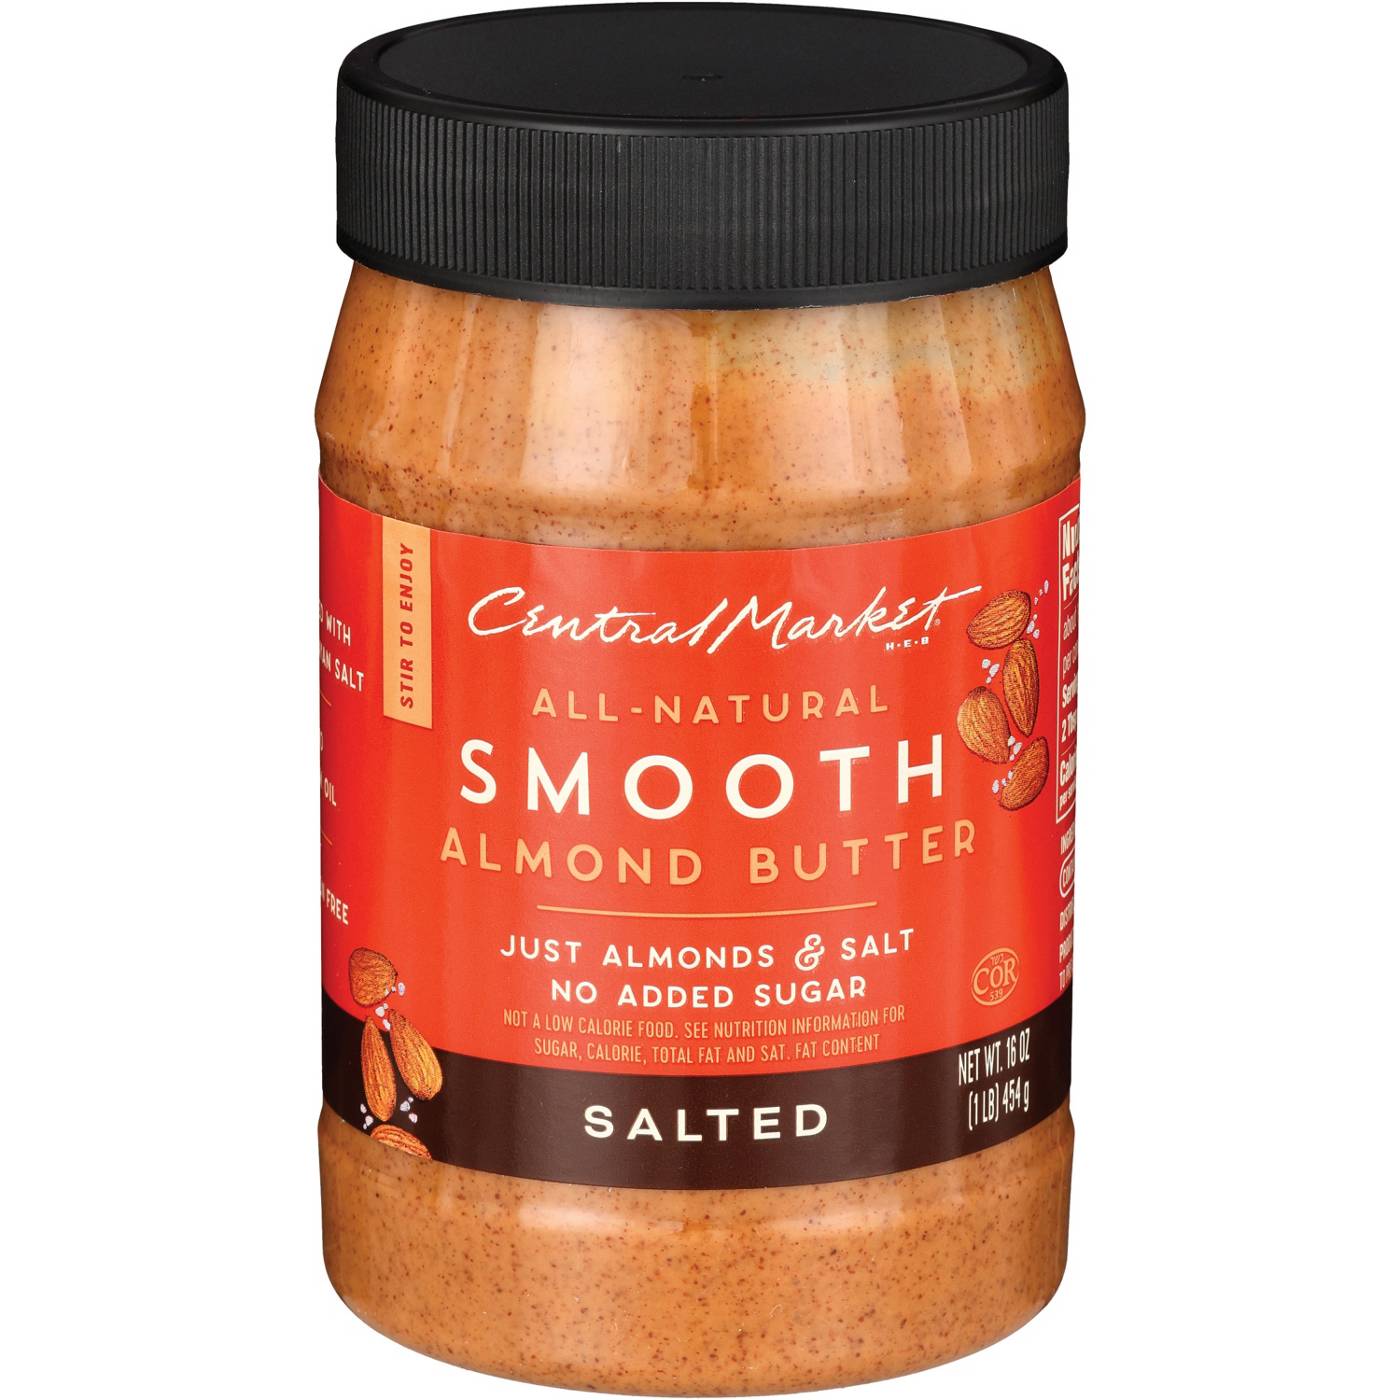 Central Market All-Natural Smooth Almond Butter – Salted; image 2 of 2